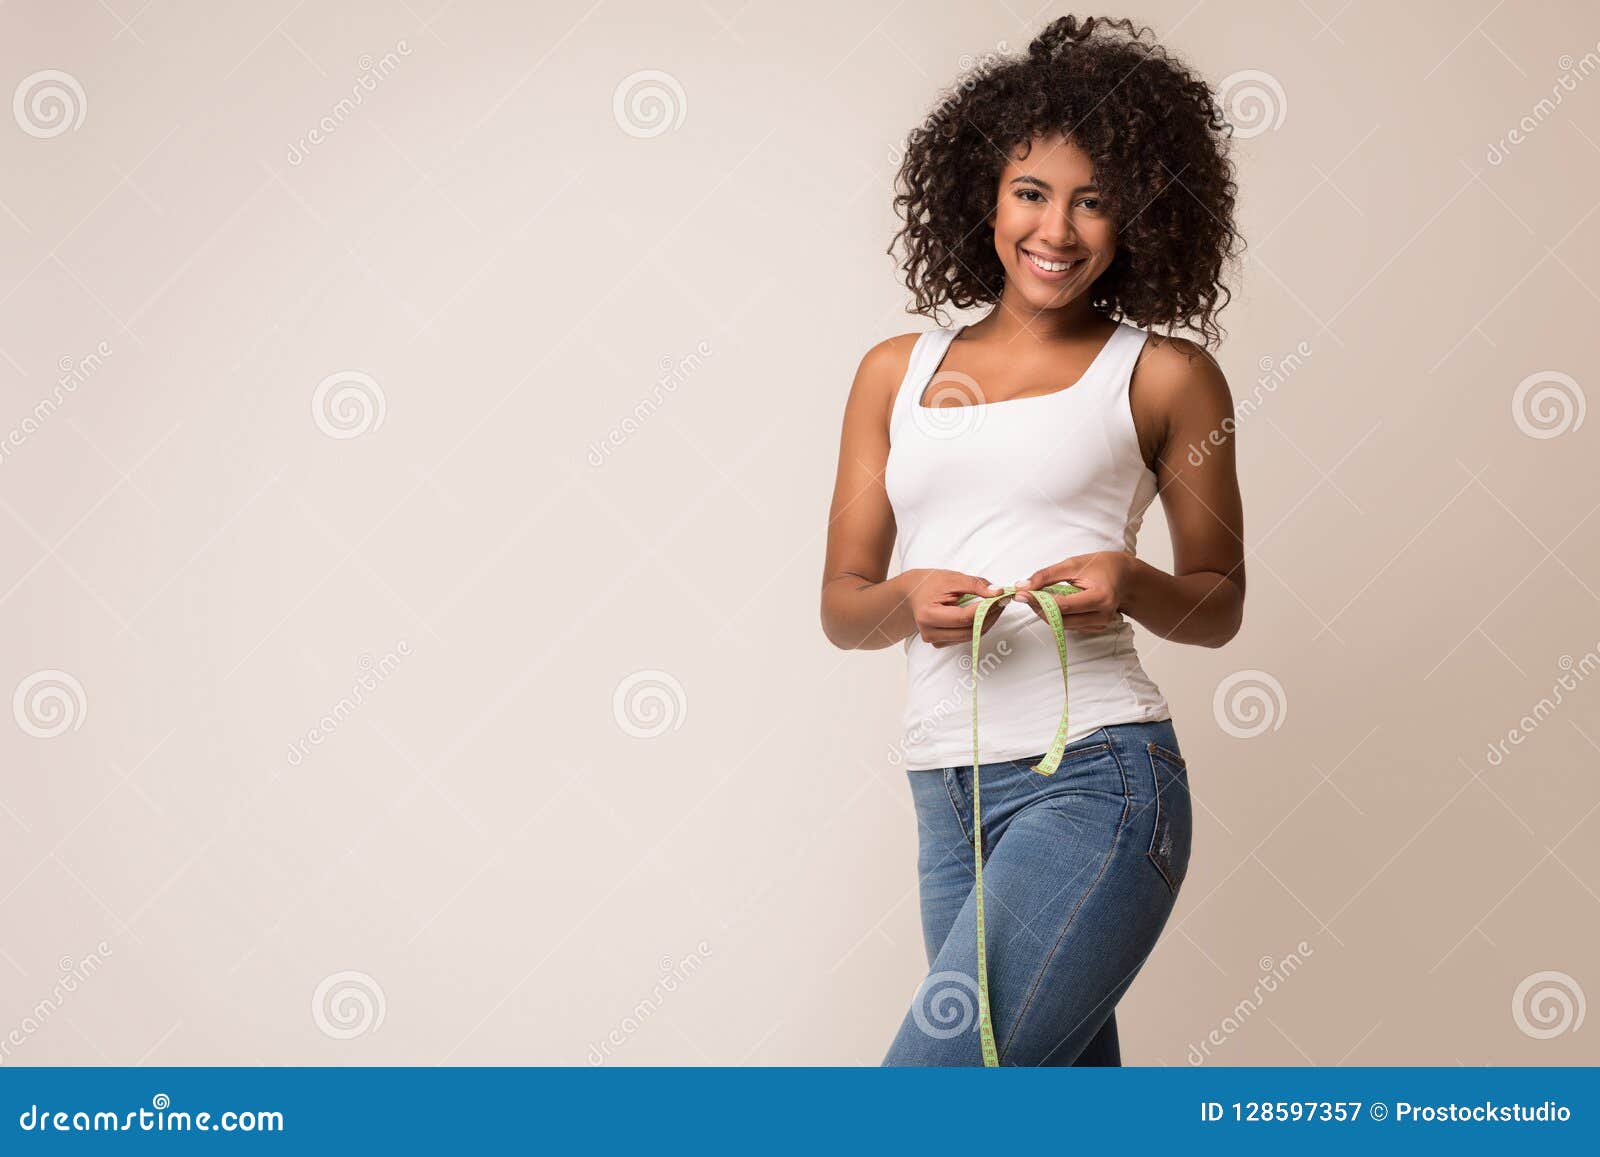 https://thumbs.dreamstime.com/z/happy-african-american-woman-measuring-waist-tape-happy-african-american-woman-measuring-waist-tape-over-light-128597357.jpg